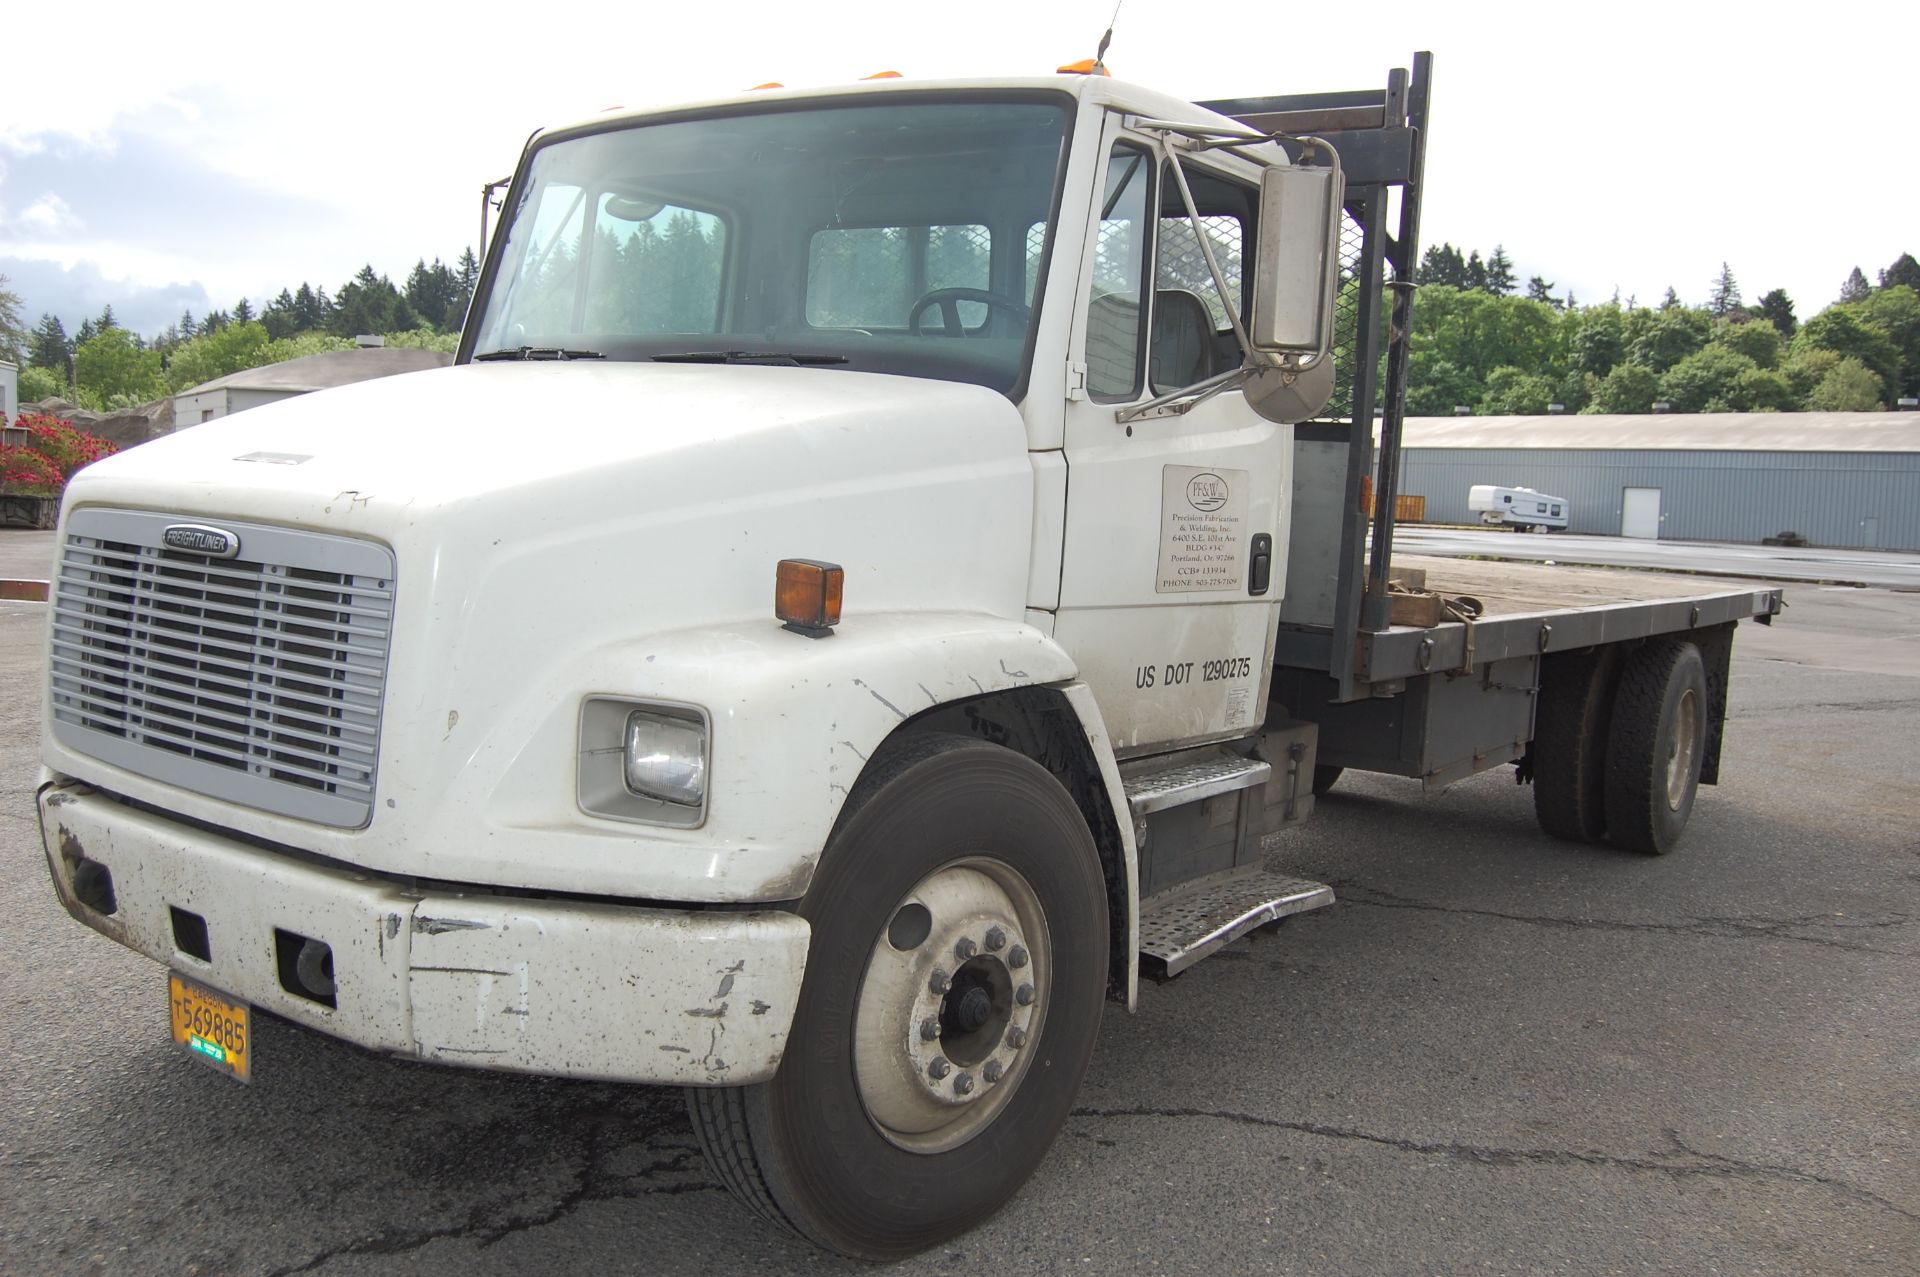 1996 Freightliner F70 20' Tandem axle Flatbed Truck 6 speed manual transmission - Image 5 of 8